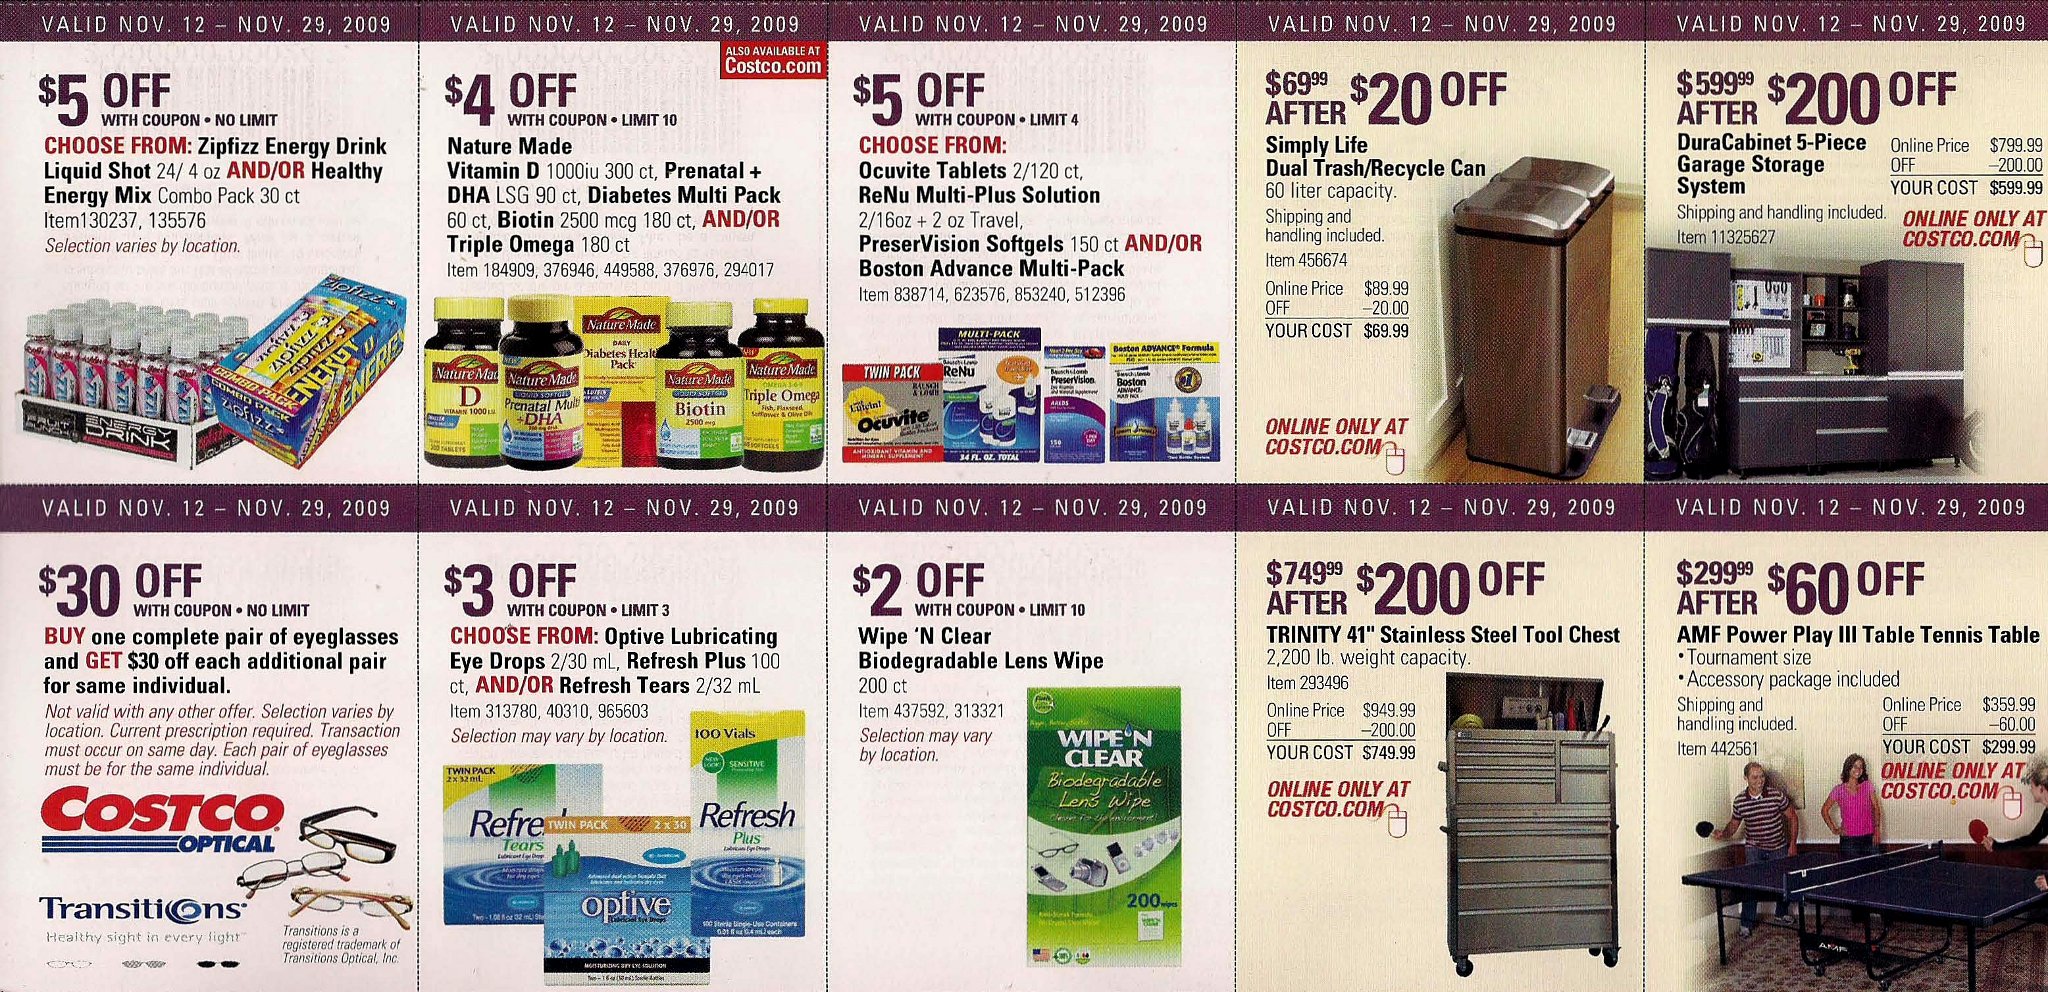 Coupon book page 8 in full-size.